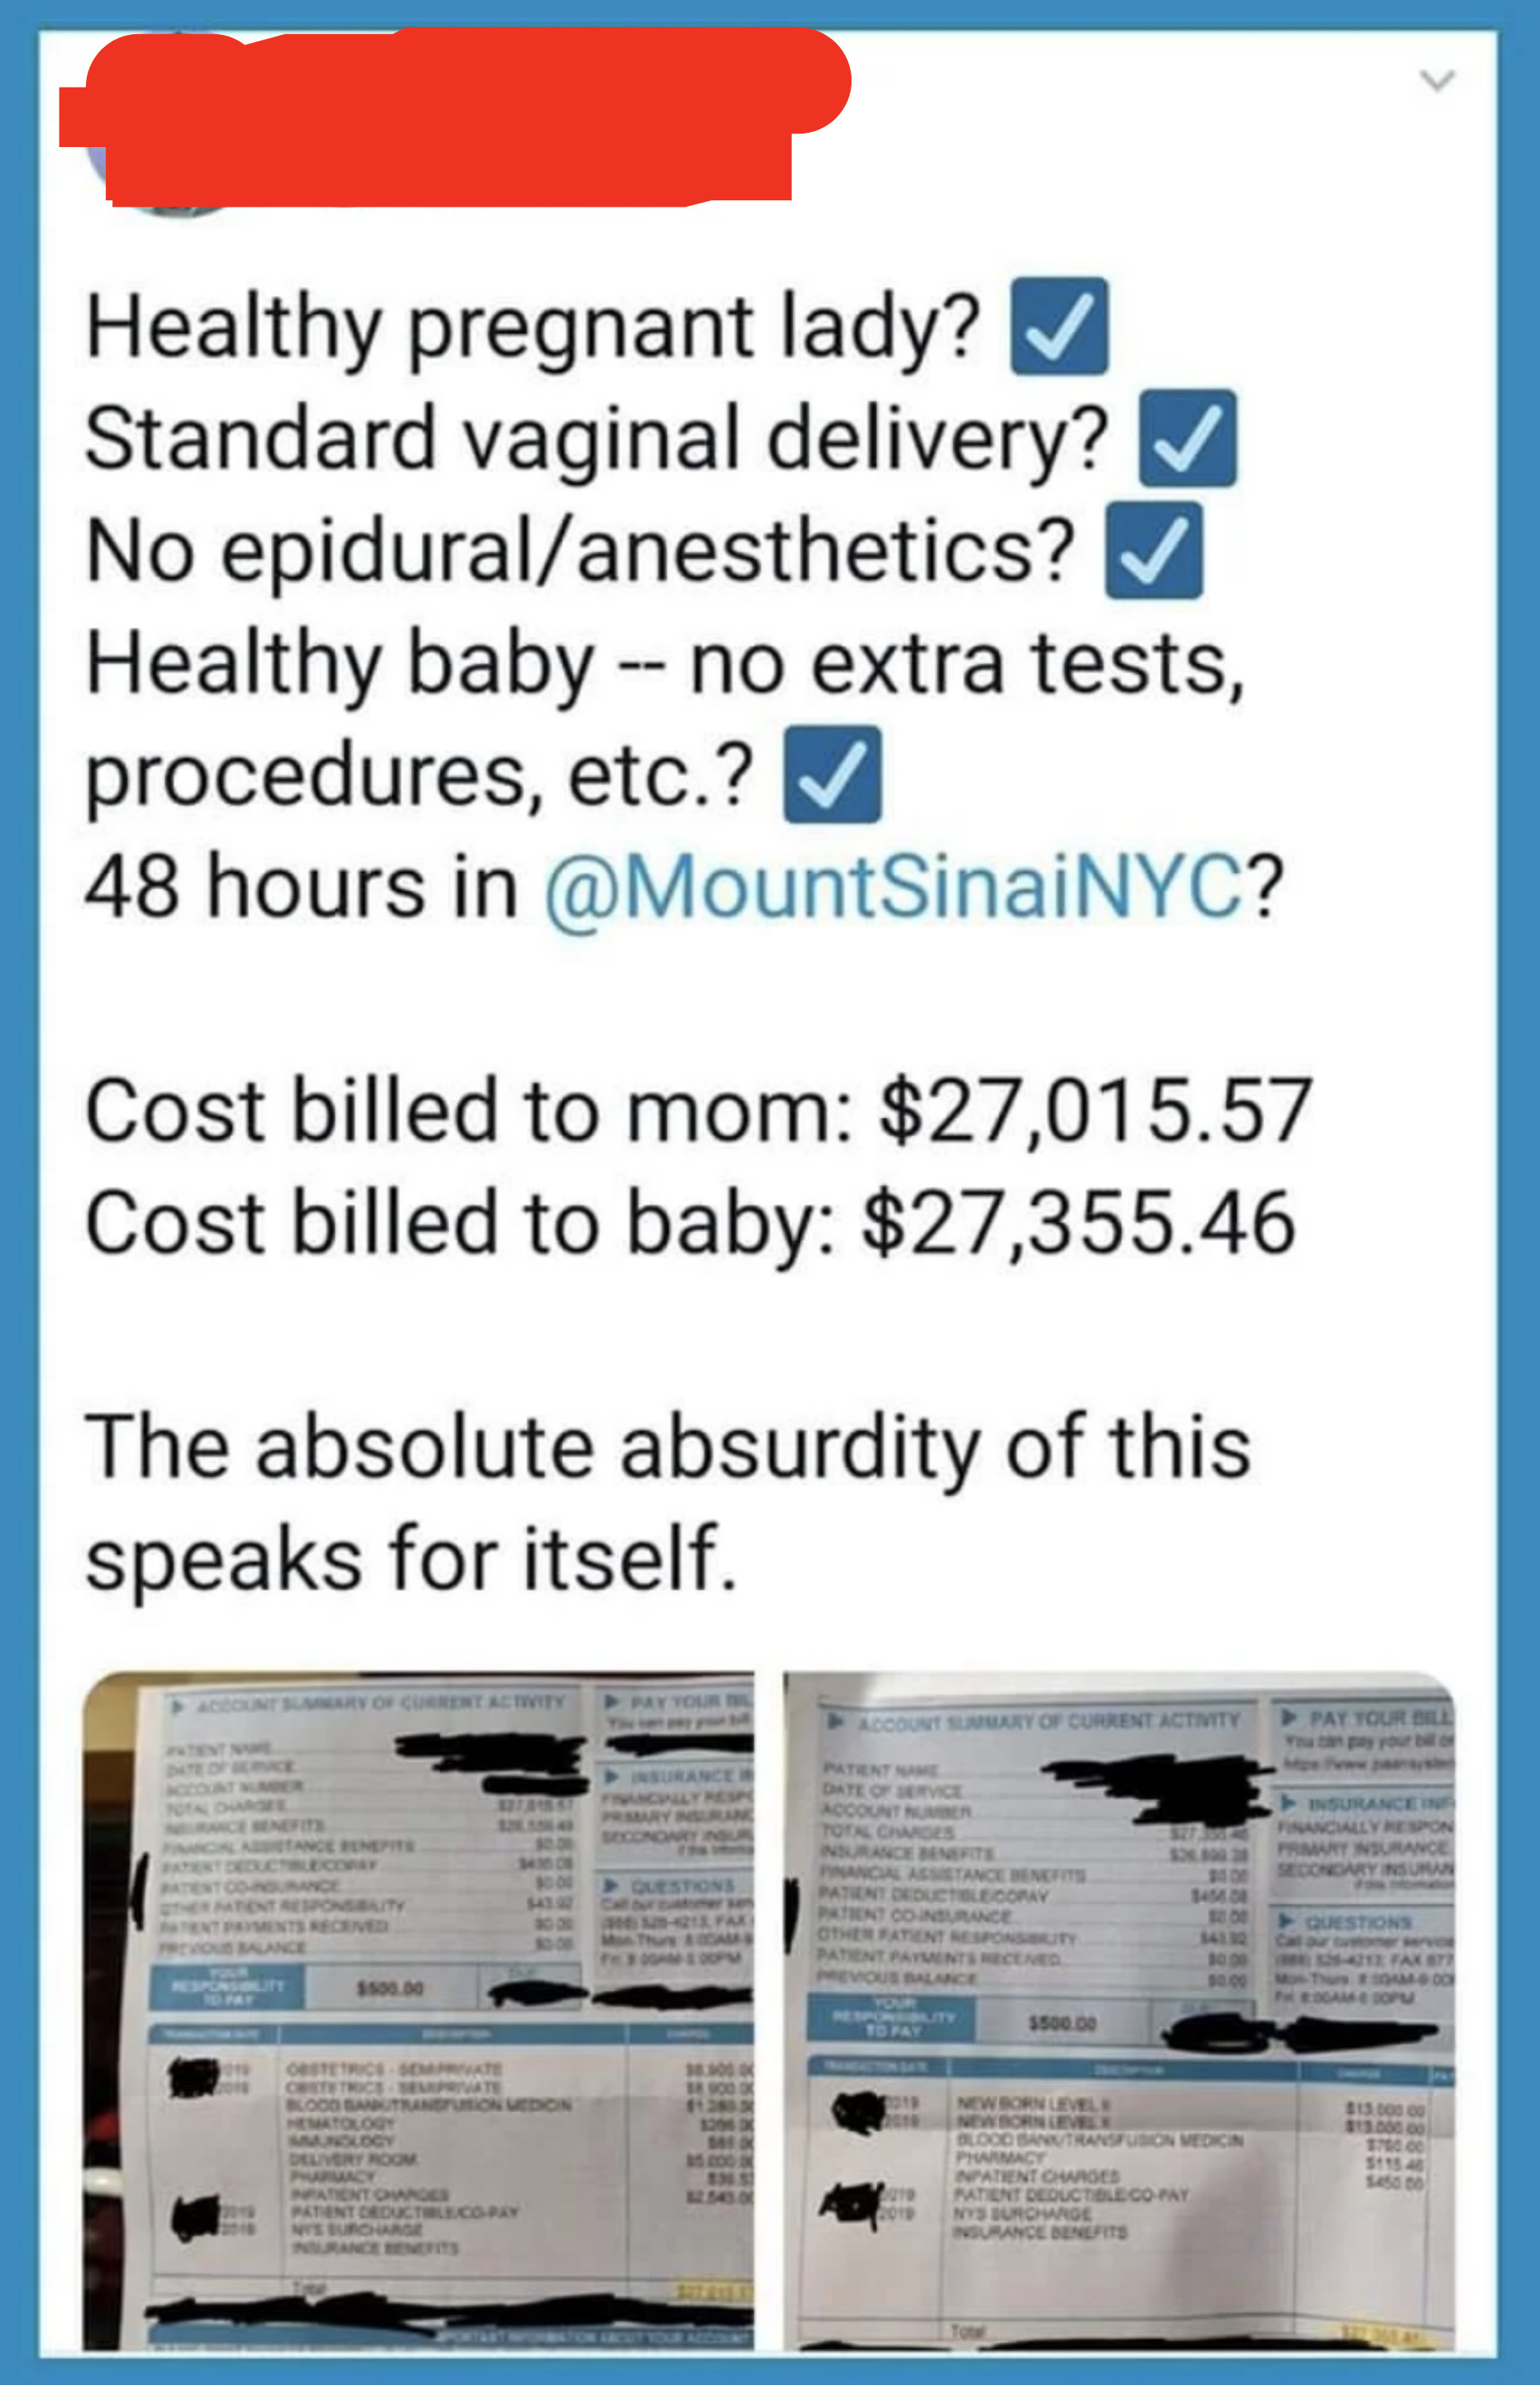 Tweet: &quot;healthy pregnant lady? check; standard vaginal delivery? check; no epidural/anesthetics? check; healthy baby - no extra tests, procedures, etc? check; 48 hours in mt sinai? cost billed to mom: $27k; cost billed to baby: $27k absurd&quot;